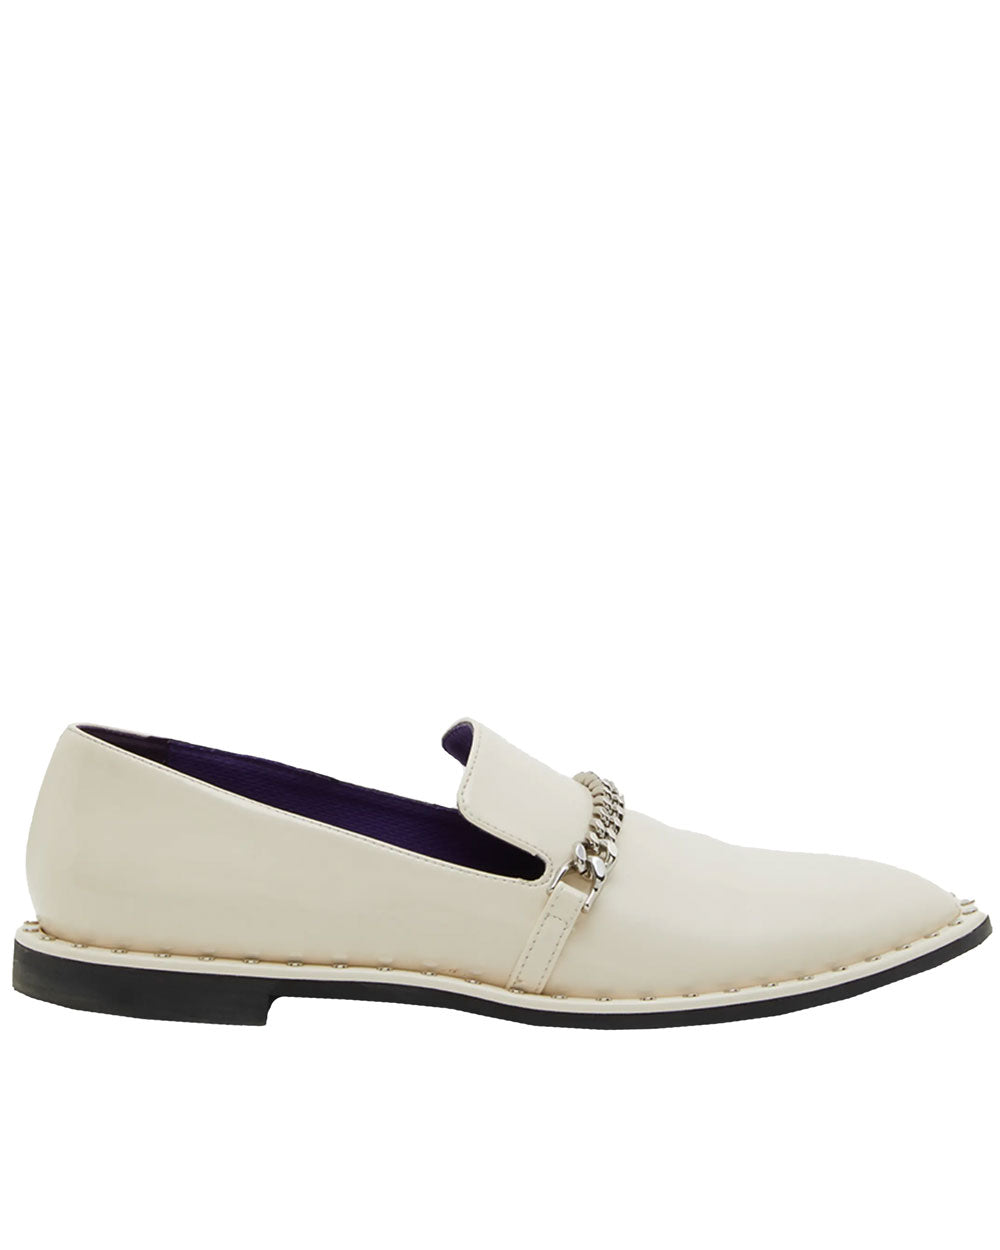 Falabella Chain Loafer in Ivory